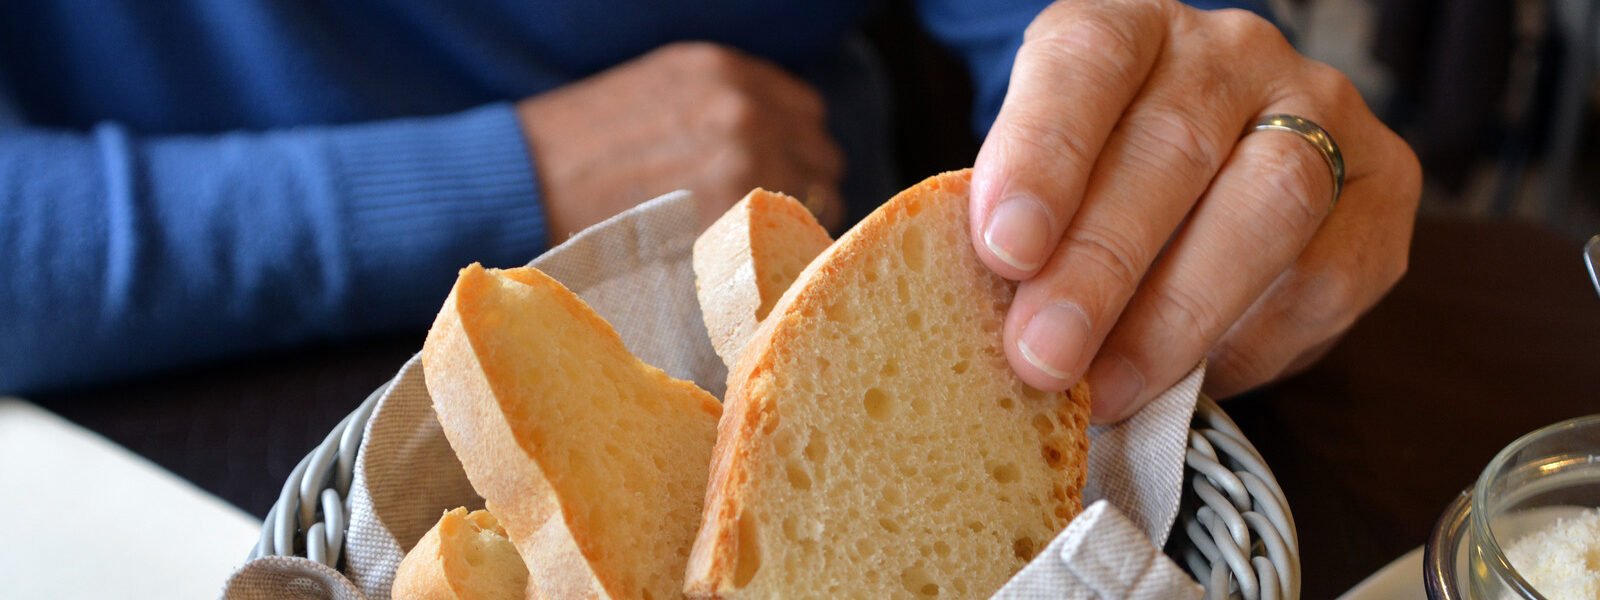 Here's What Happens When You Eat Bread On An Empty Stomach - Health Digest